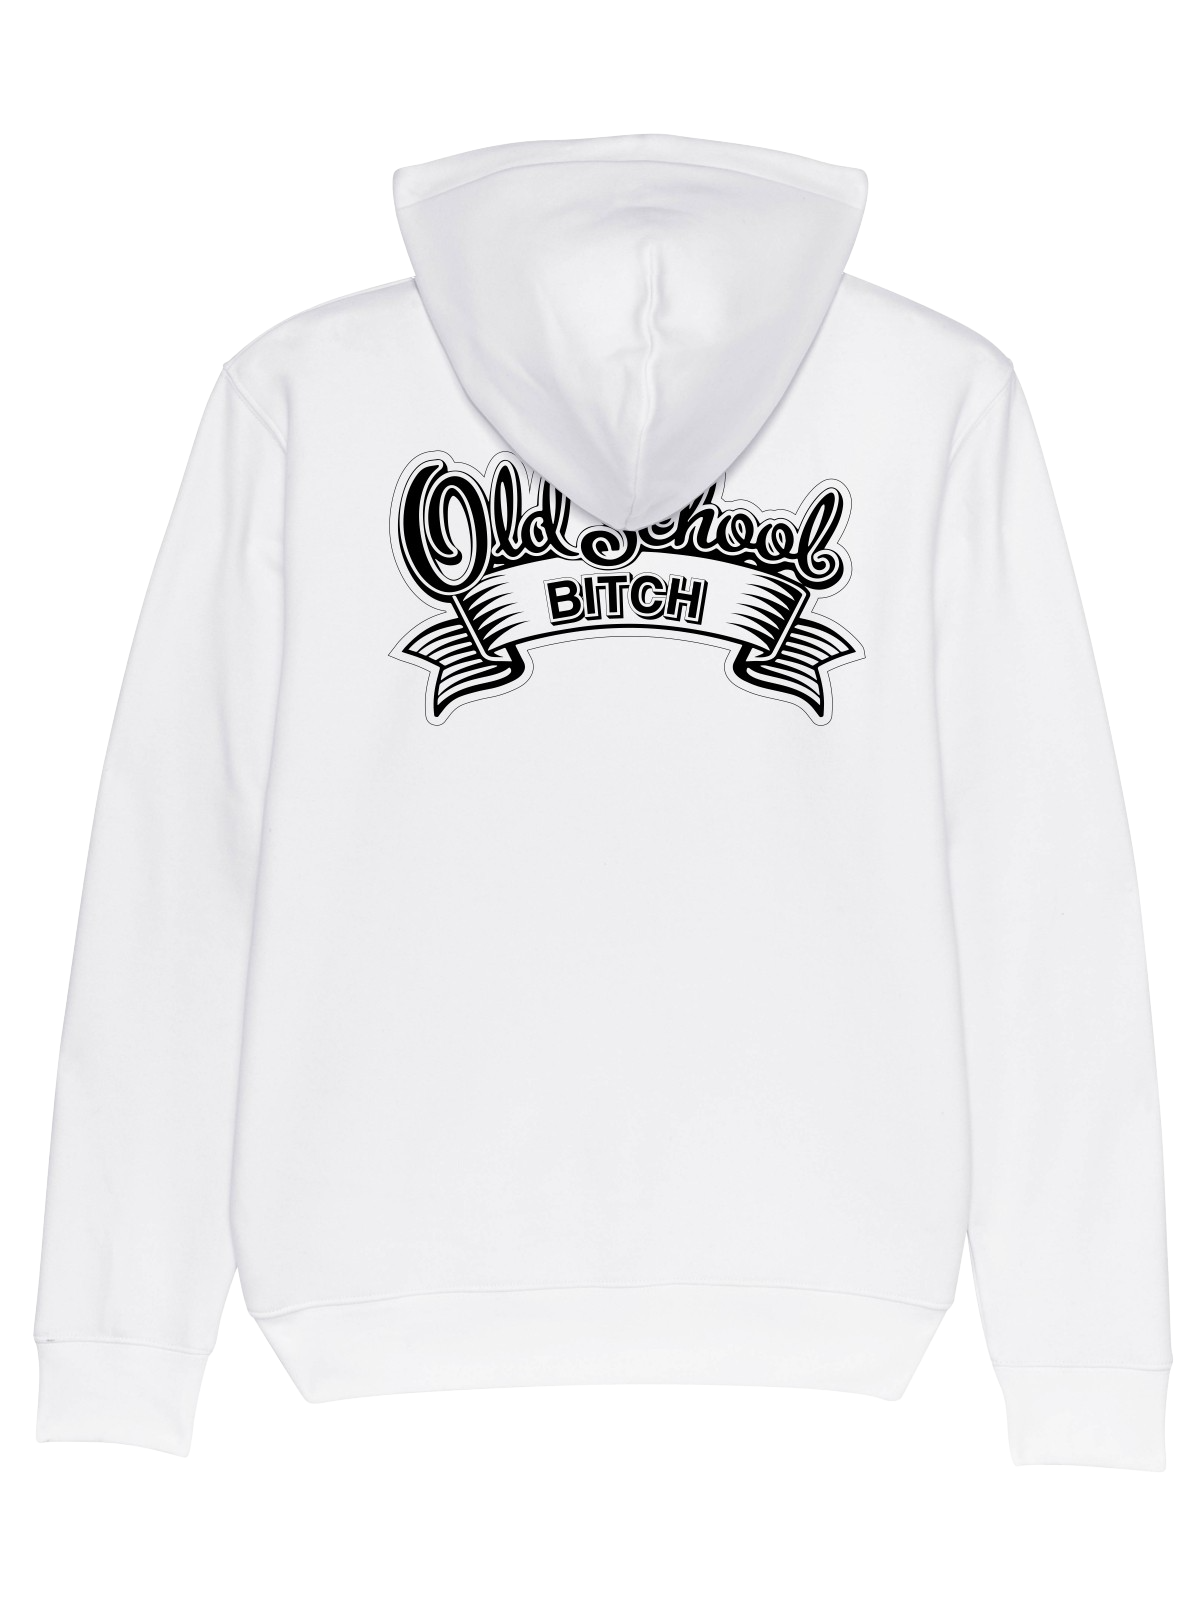 4Brothers T-Shirt old school bitch  Hoody New White 4XL